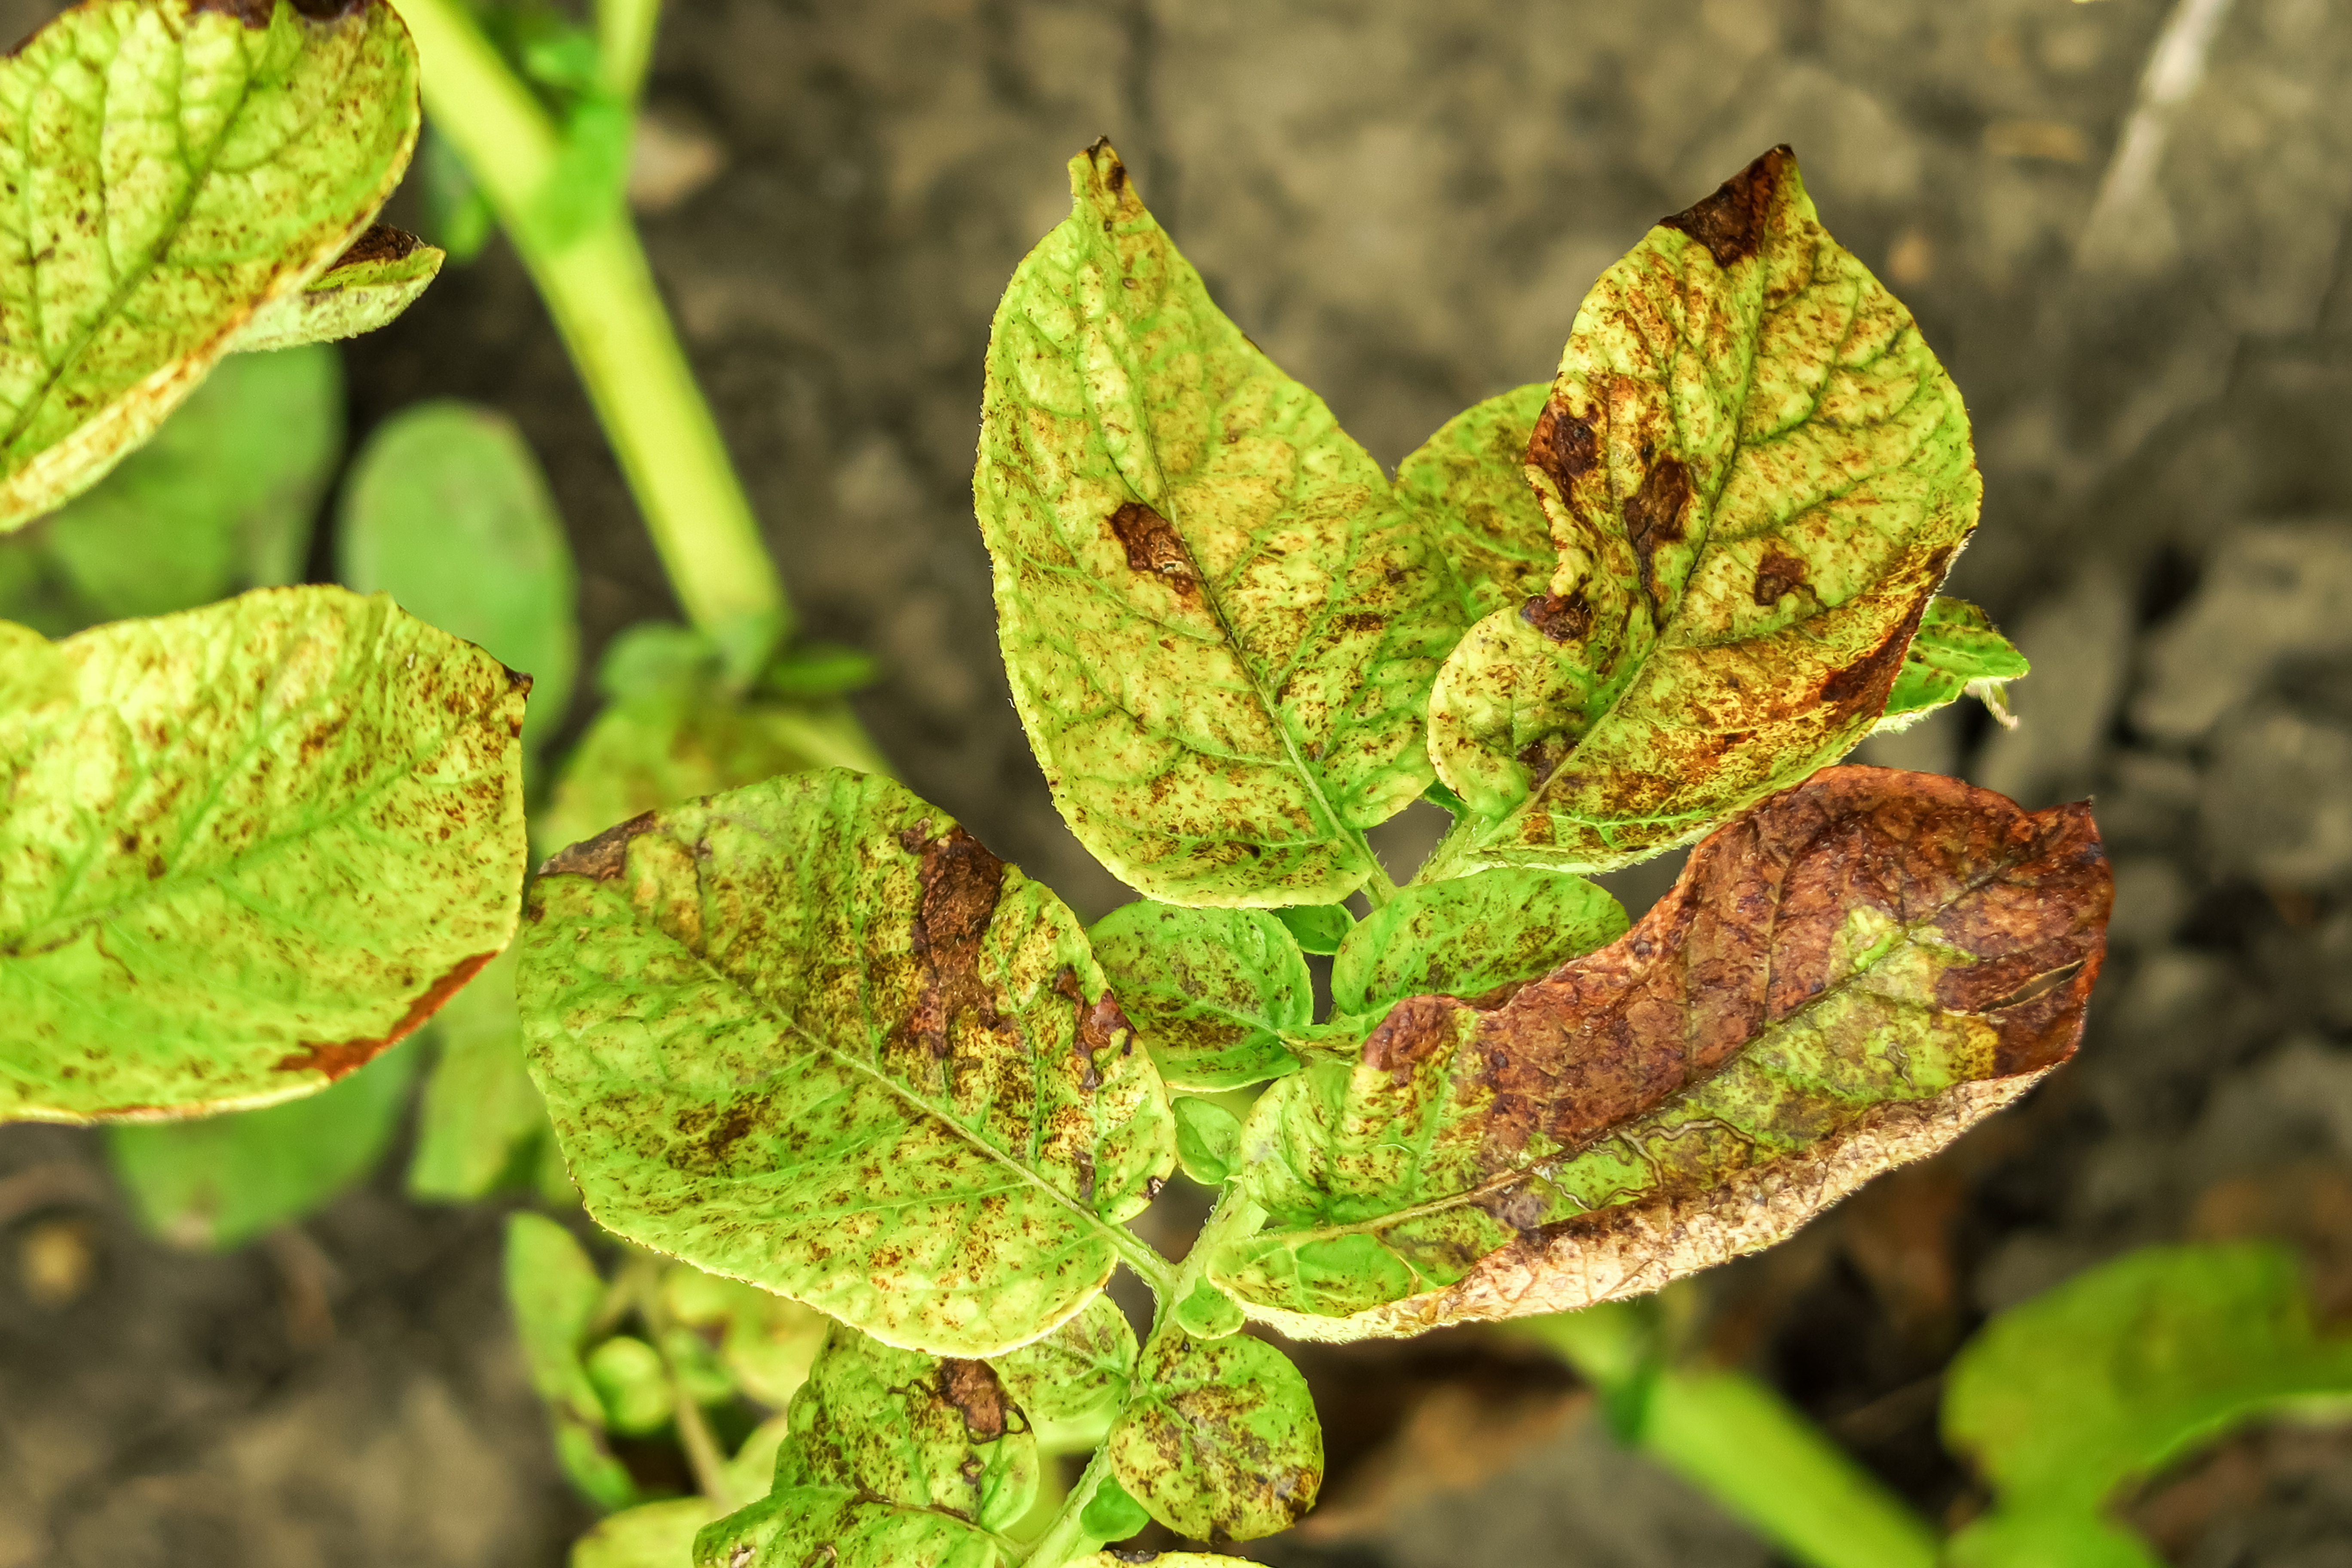 A potato plant with brown lesions on the leaves